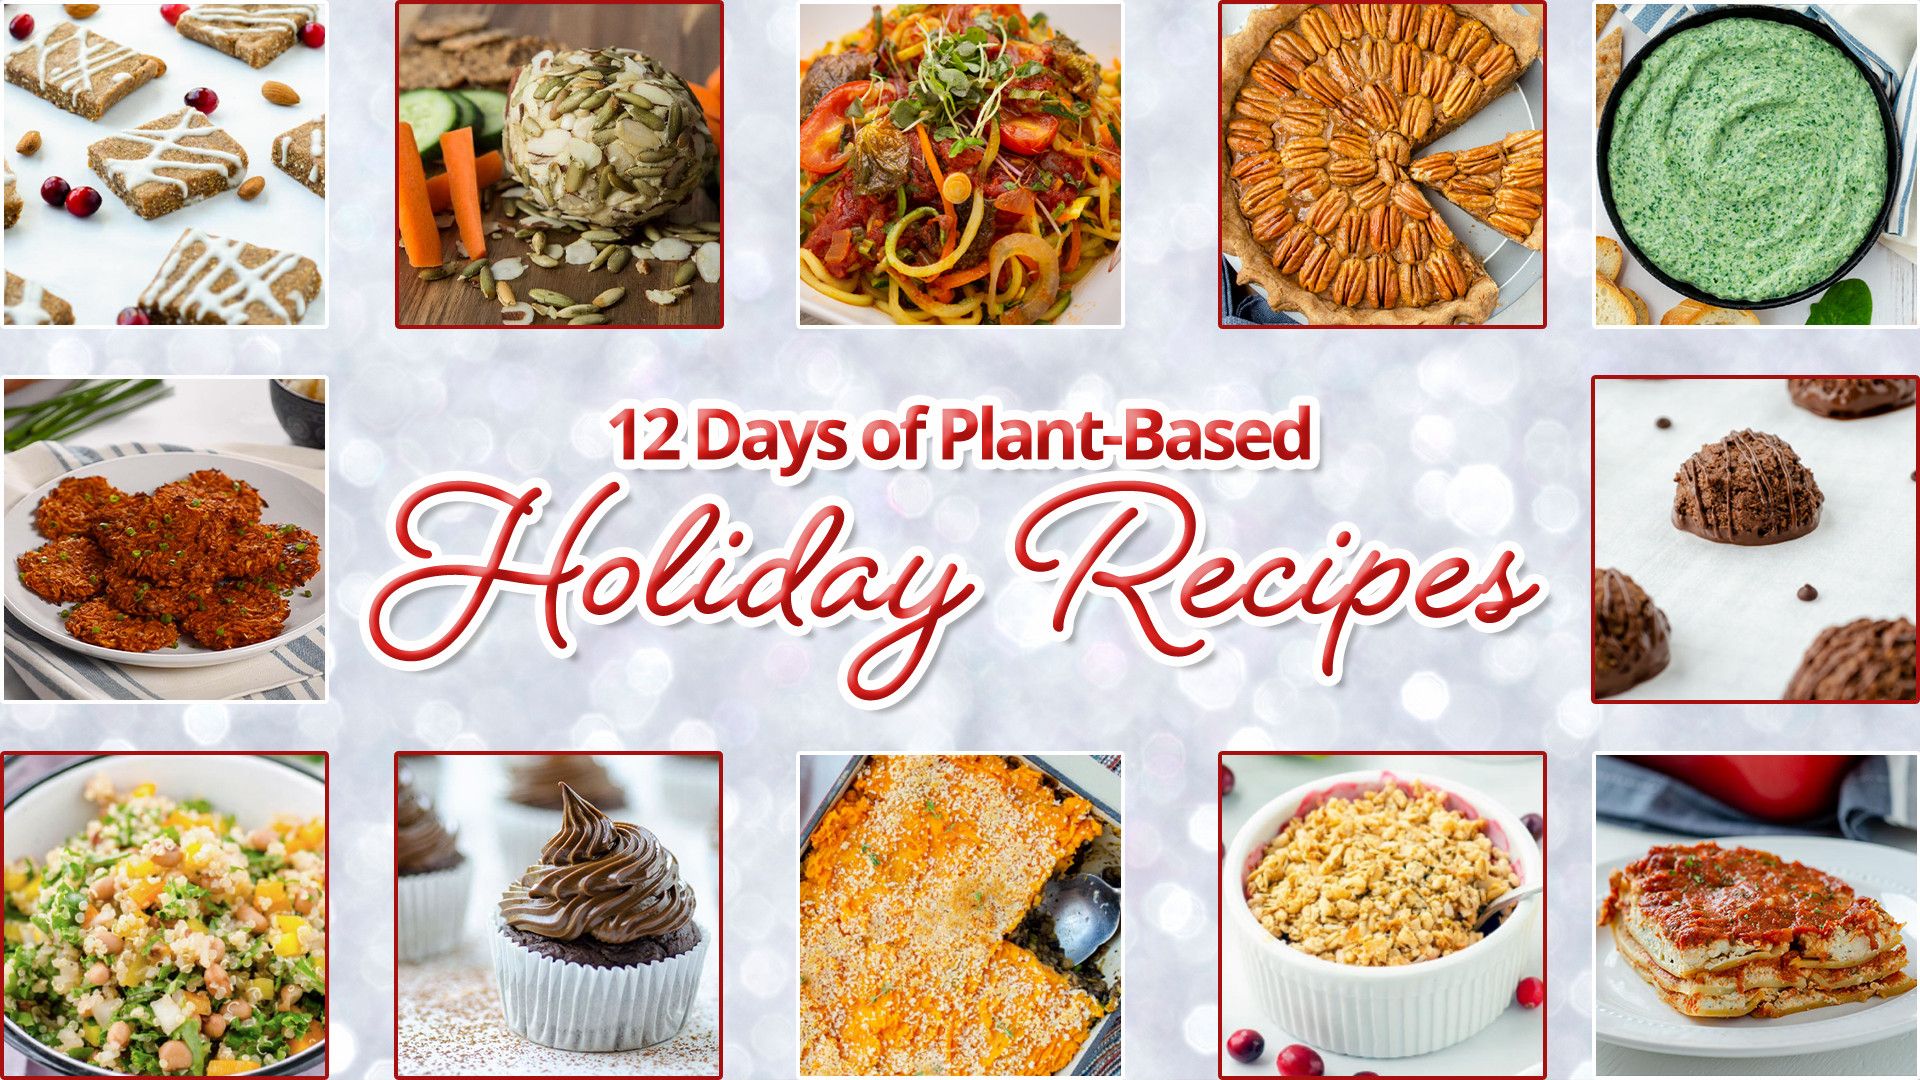 Celebrate the holidays with 12 days of healthy and delicious plant-based recipes!